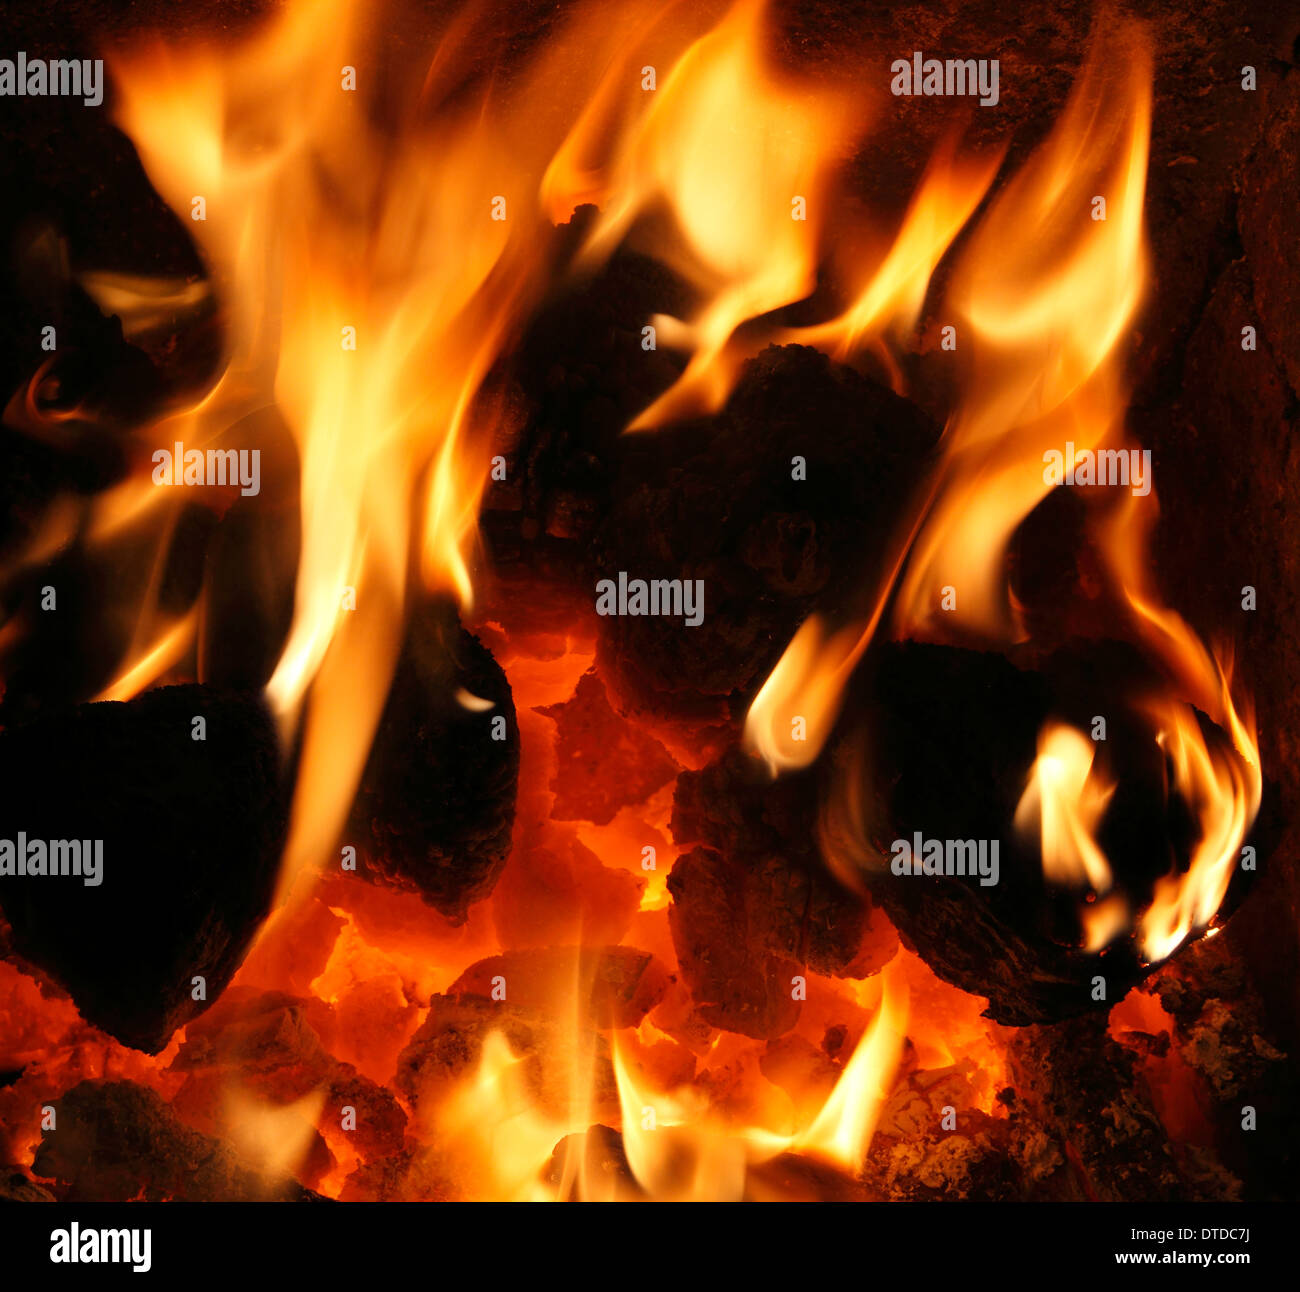 Solid Fuel, domestic coal Fire, burning, flame, flames heart fireside heat energy power fires warmth warm home fires Stock Photo